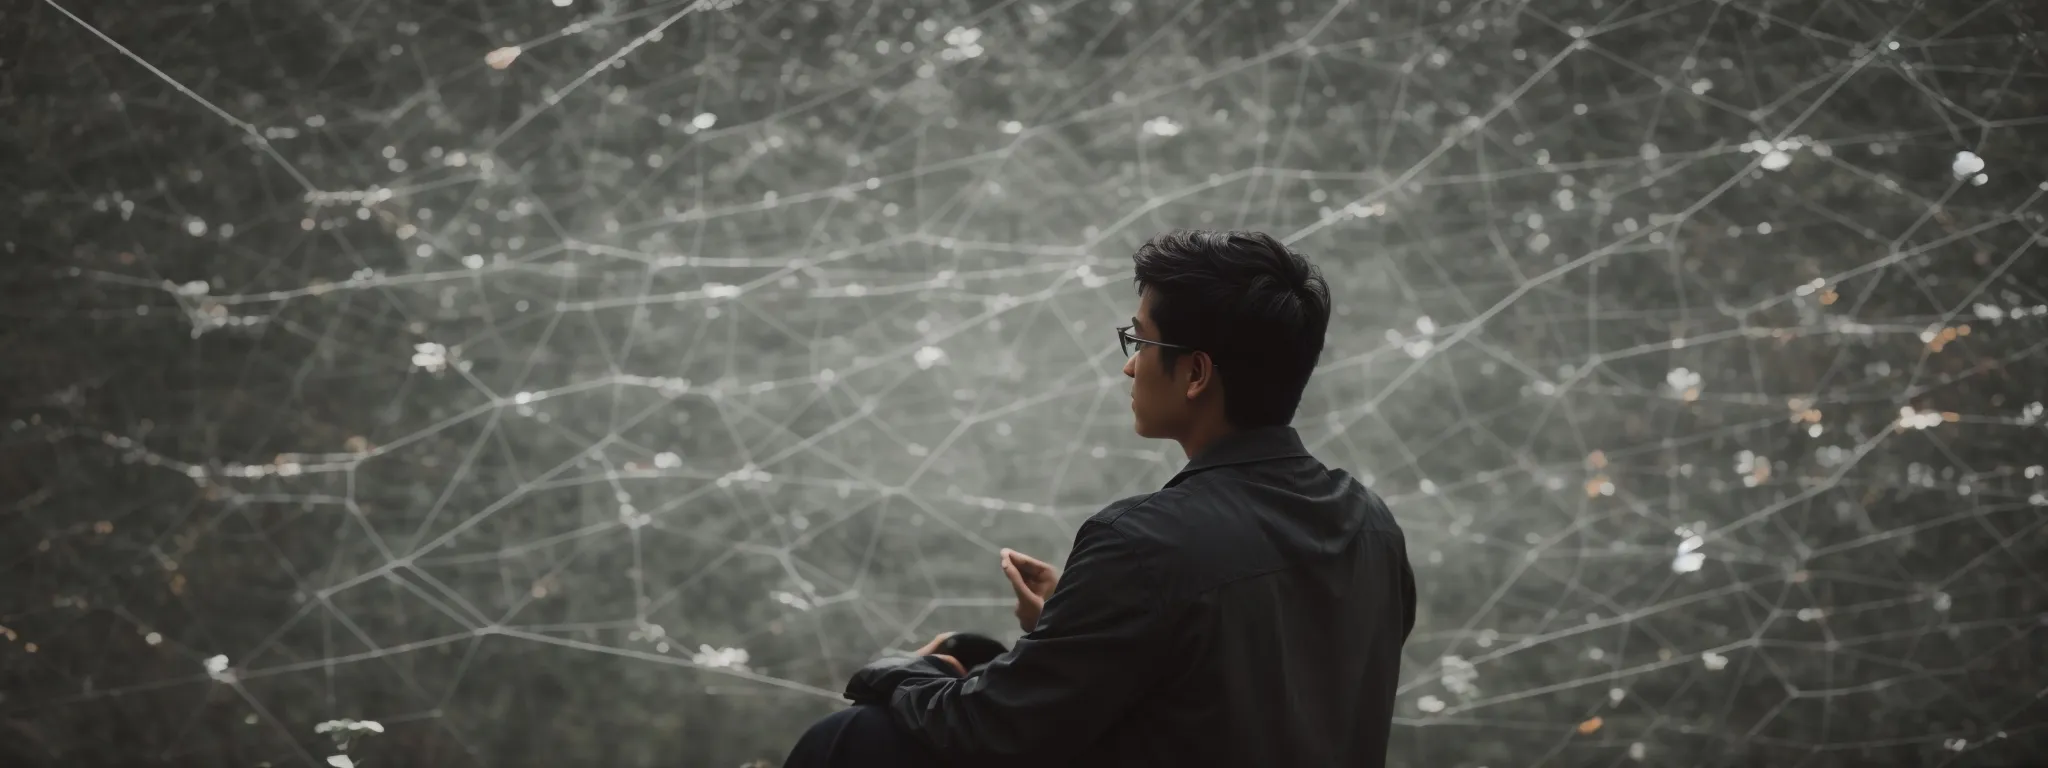 a person in a relaxed pose contemplating a large, intricate web connecting various icons symbolizing different digital marketing strategies against a backdrop of search engine interface elements.